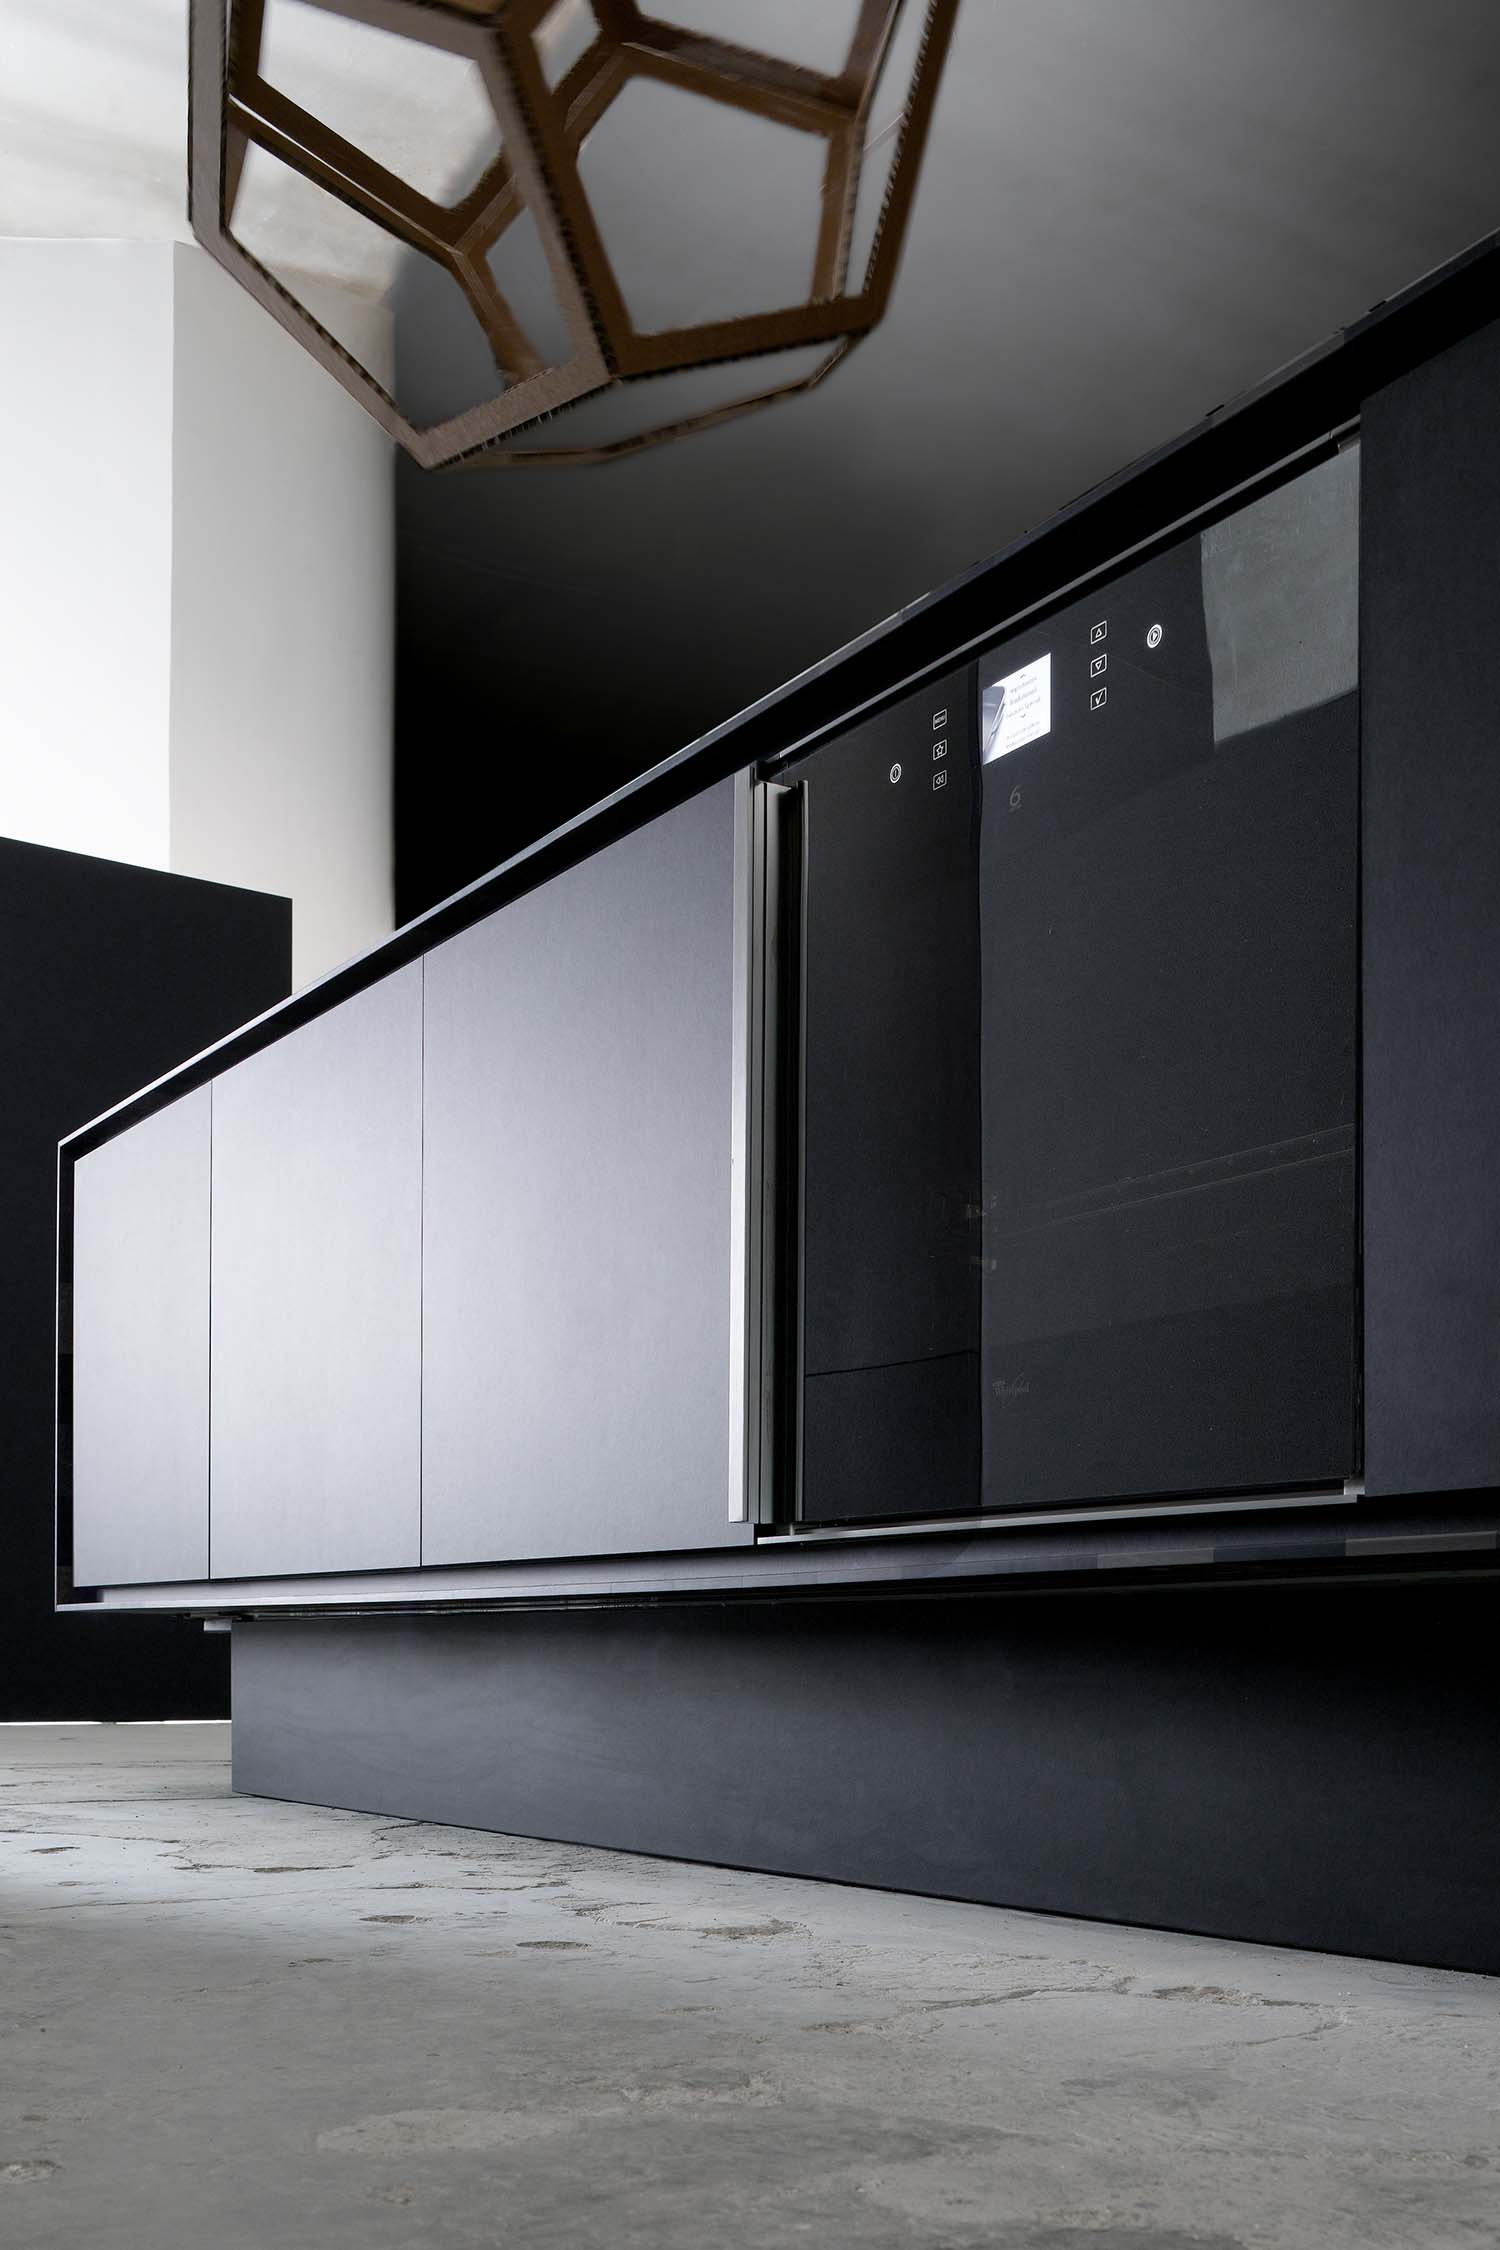 Matt finished kitchen doors keep the aesthetic highly modern and give black kitchen appliances a chance to feature.